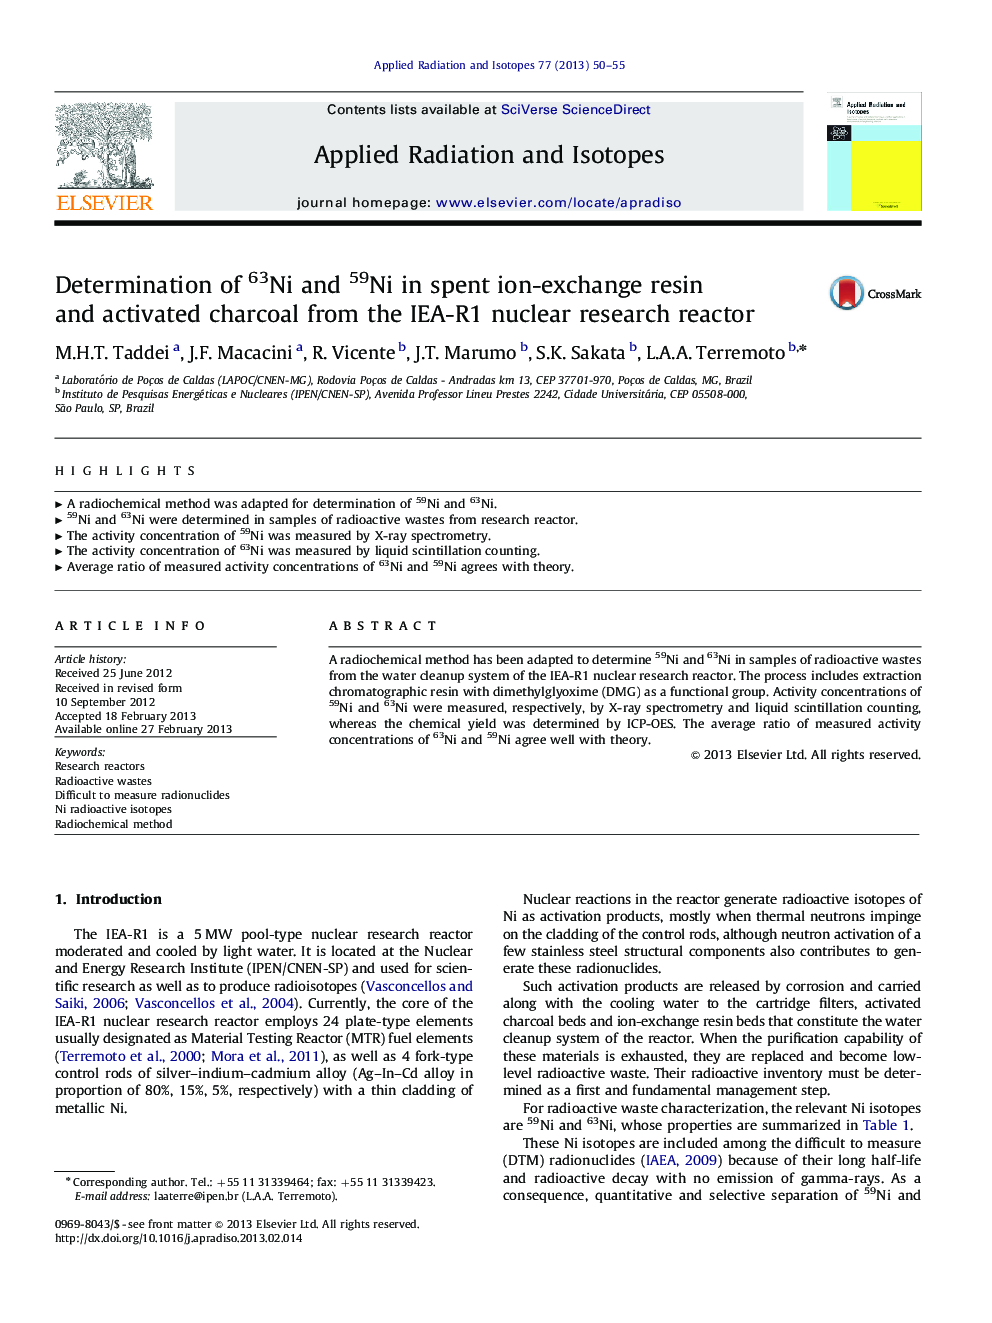 Determination of 63Ni and 59Ni in spent ion-exchange resin and activated charcoal from the IEA-R1 nuclear research reactor